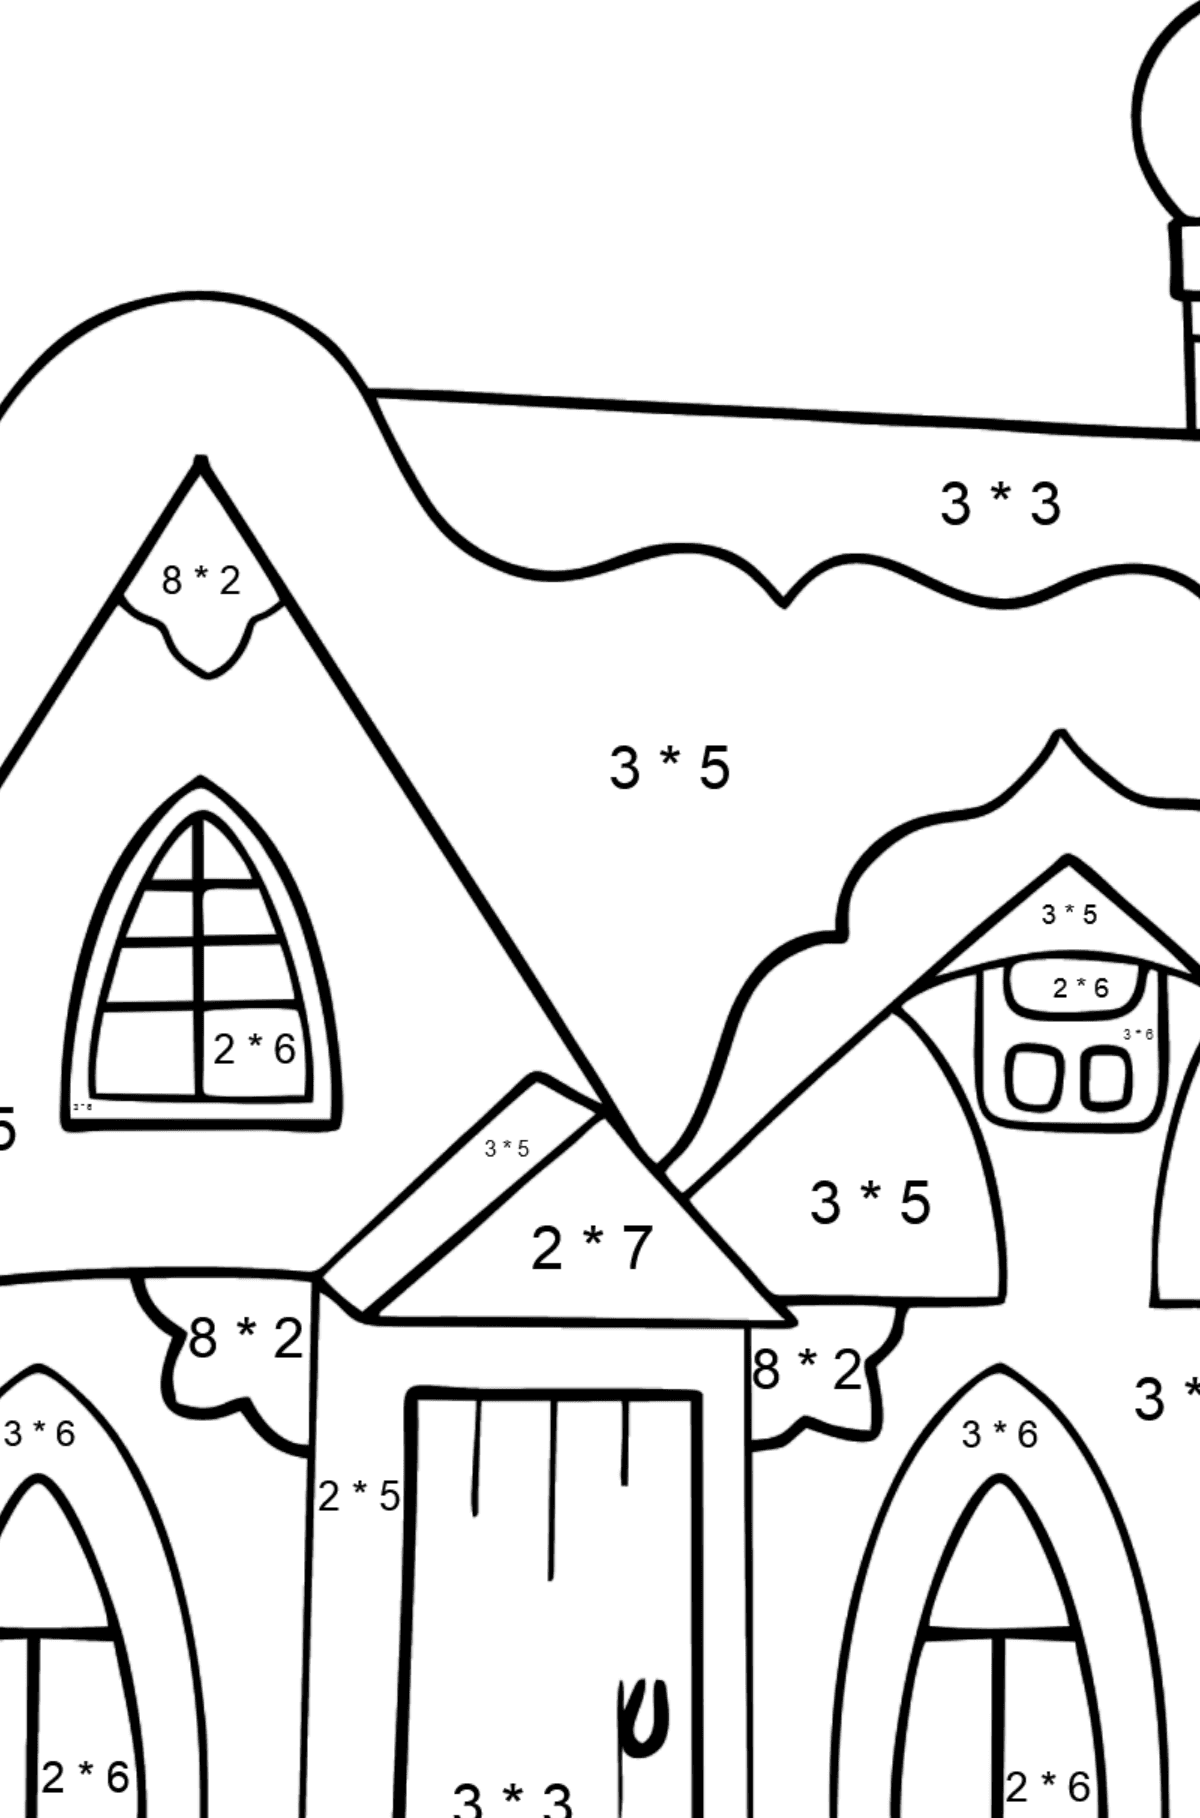 Coloring Page - A Fairytale House - Math Coloring - Multiplication for Kids